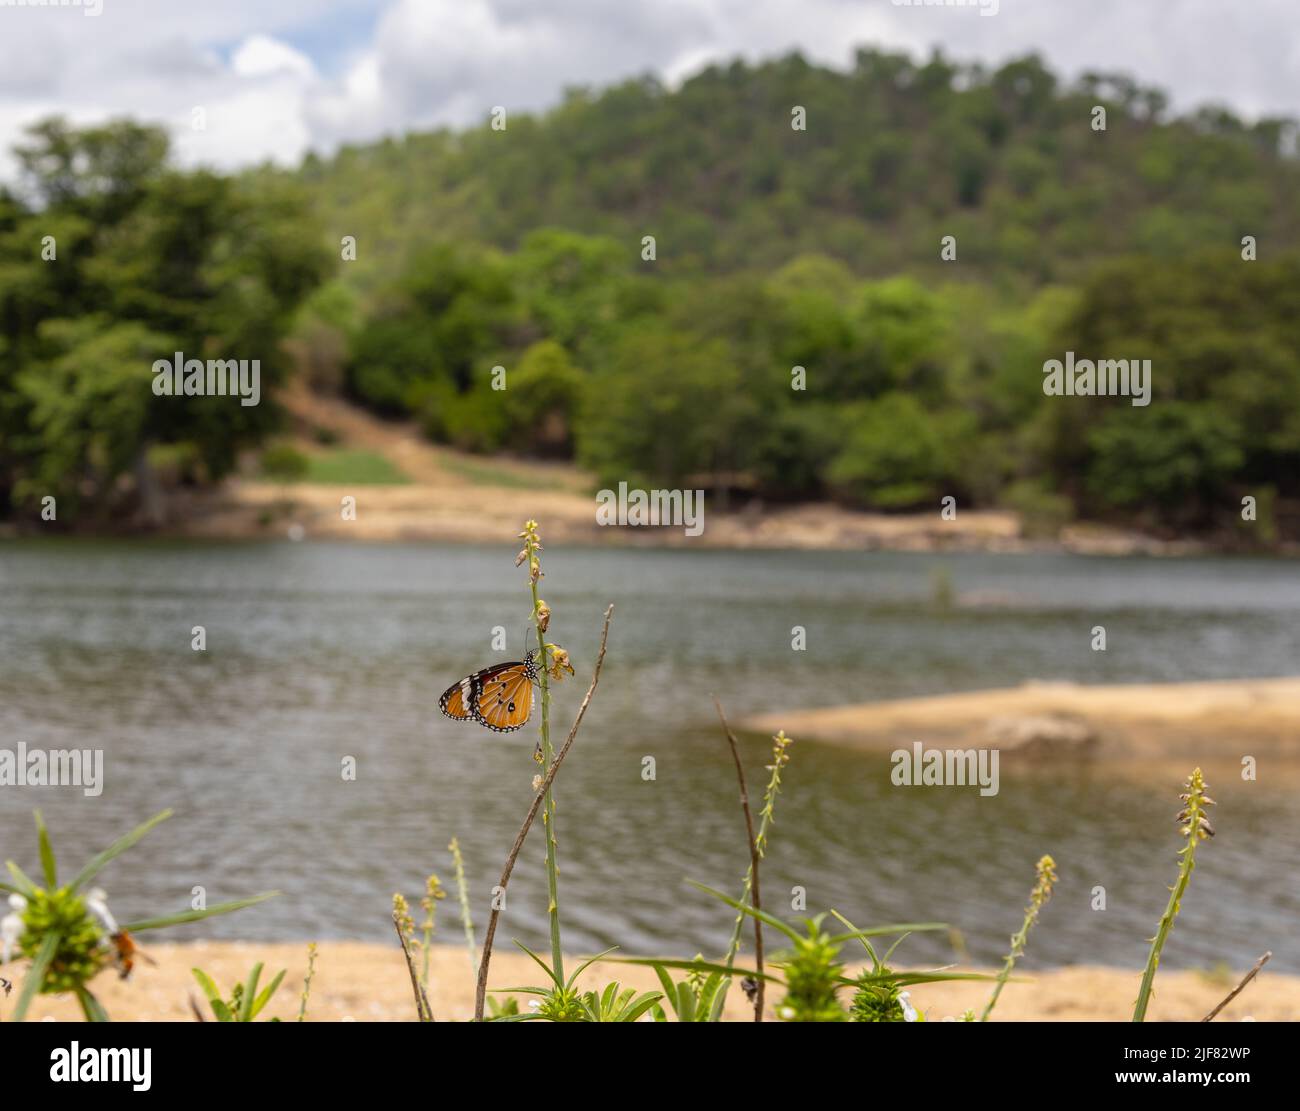 Wide Angle shot of a Plain Tiger Butterfly at the backdrop of Cauvery River (photographed in Bheemeshwari, Karnataka) Stock Photo